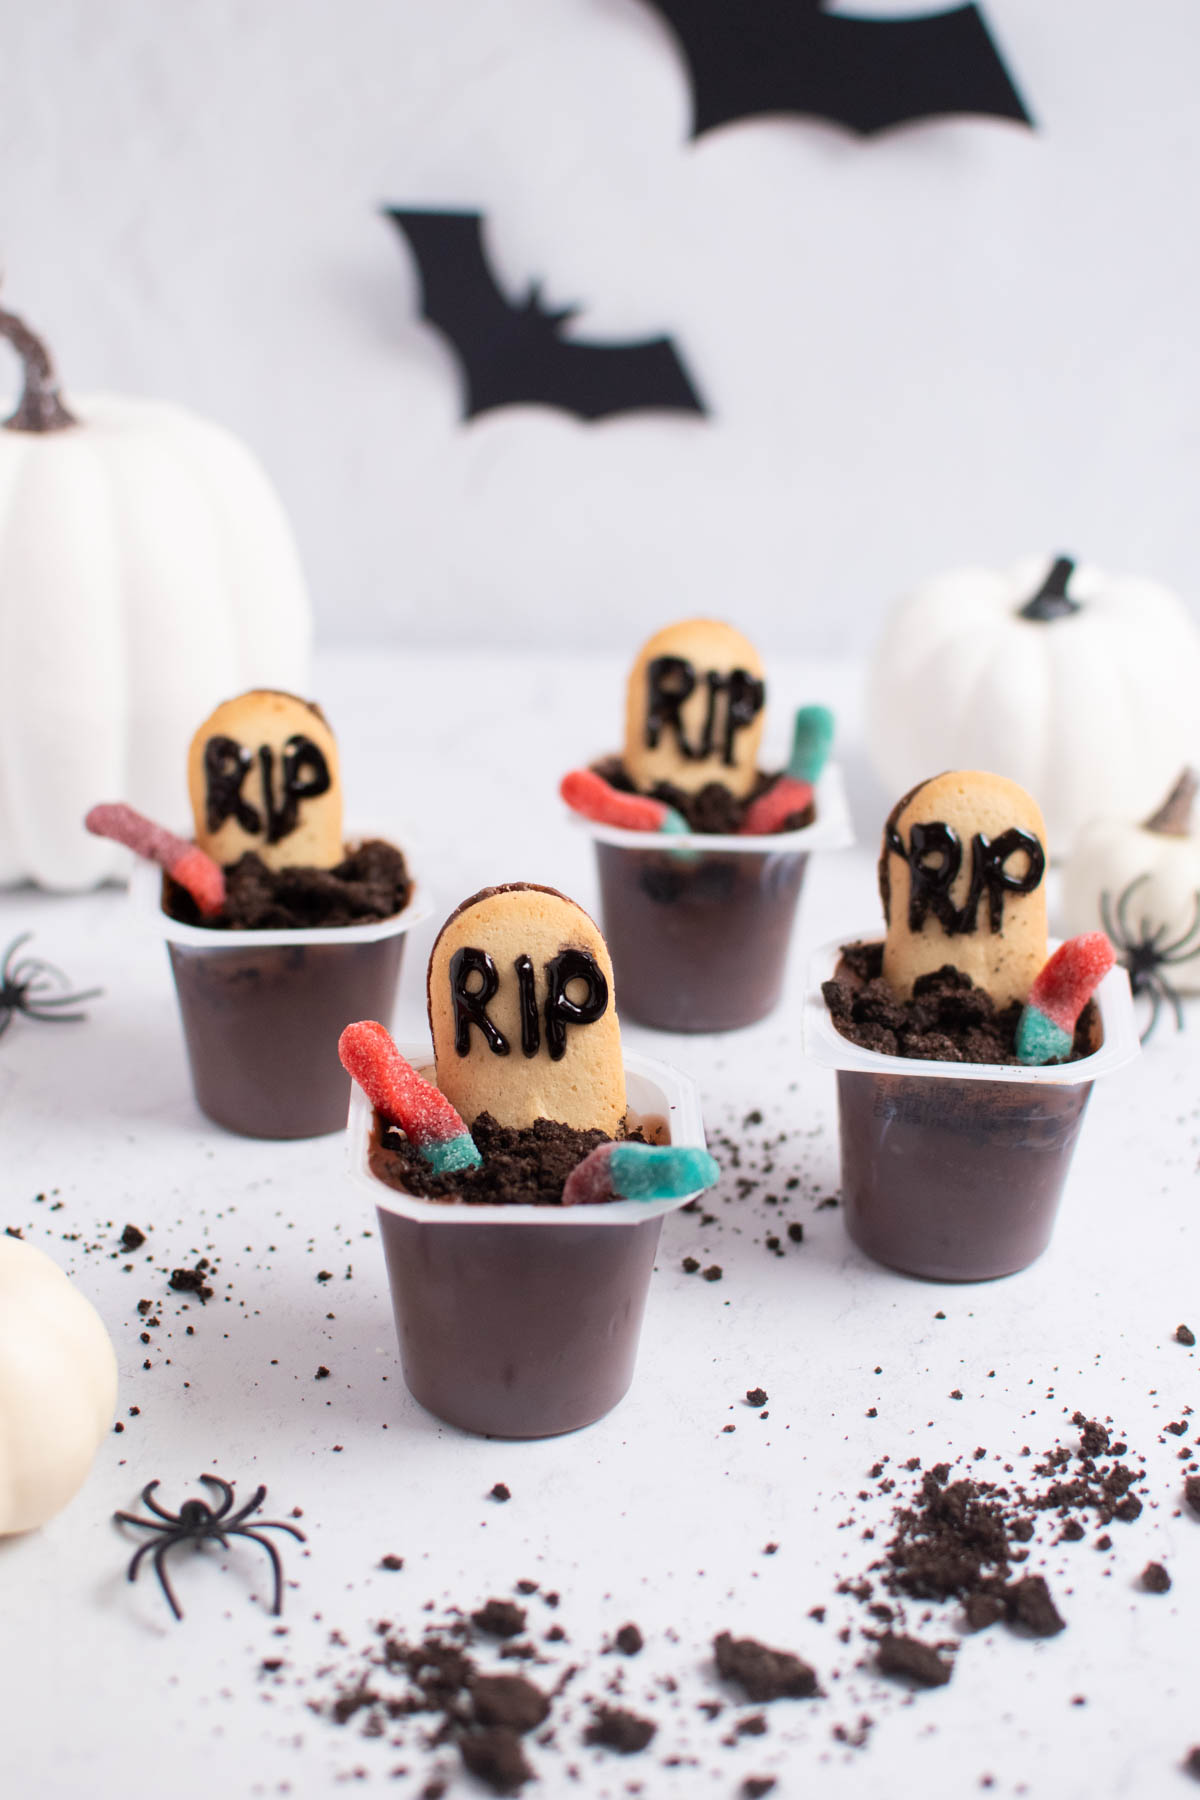 Four Halloween dirt cups with cookies and gummy worms on white table with paper bats in background.